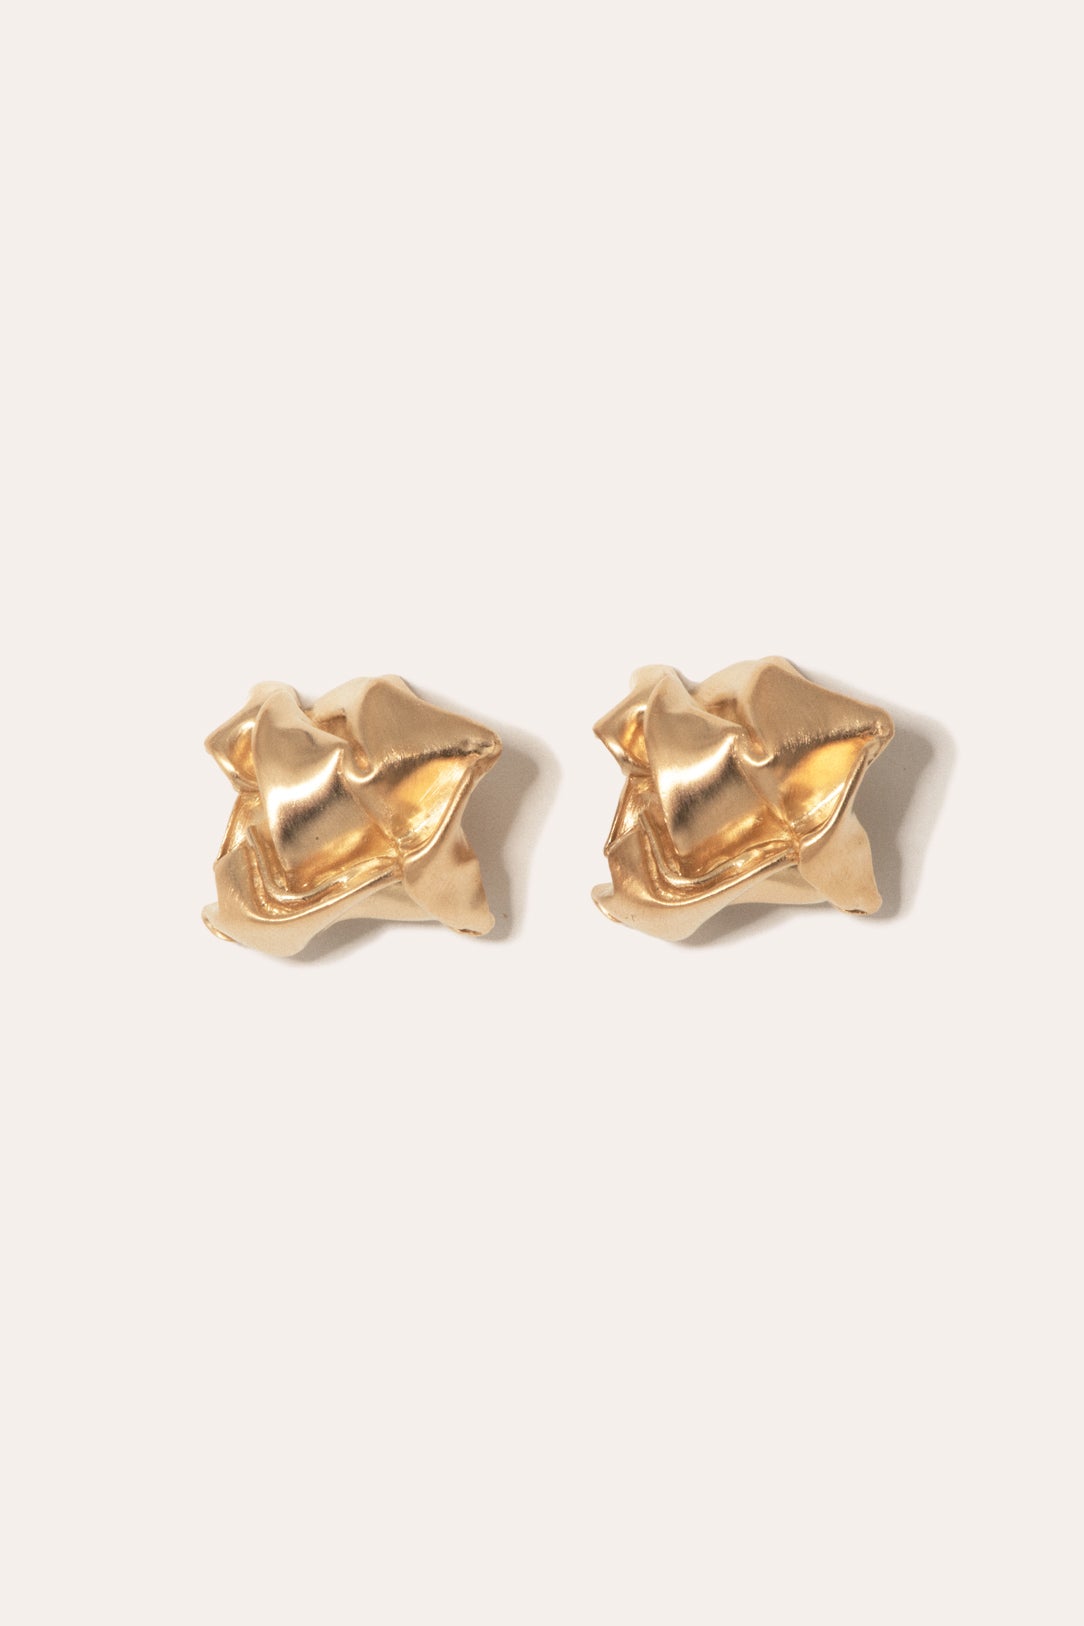 Crunched: A Tale of Abandoned Legal Strategies - Gold Vermeil Earrings |  Completedworks